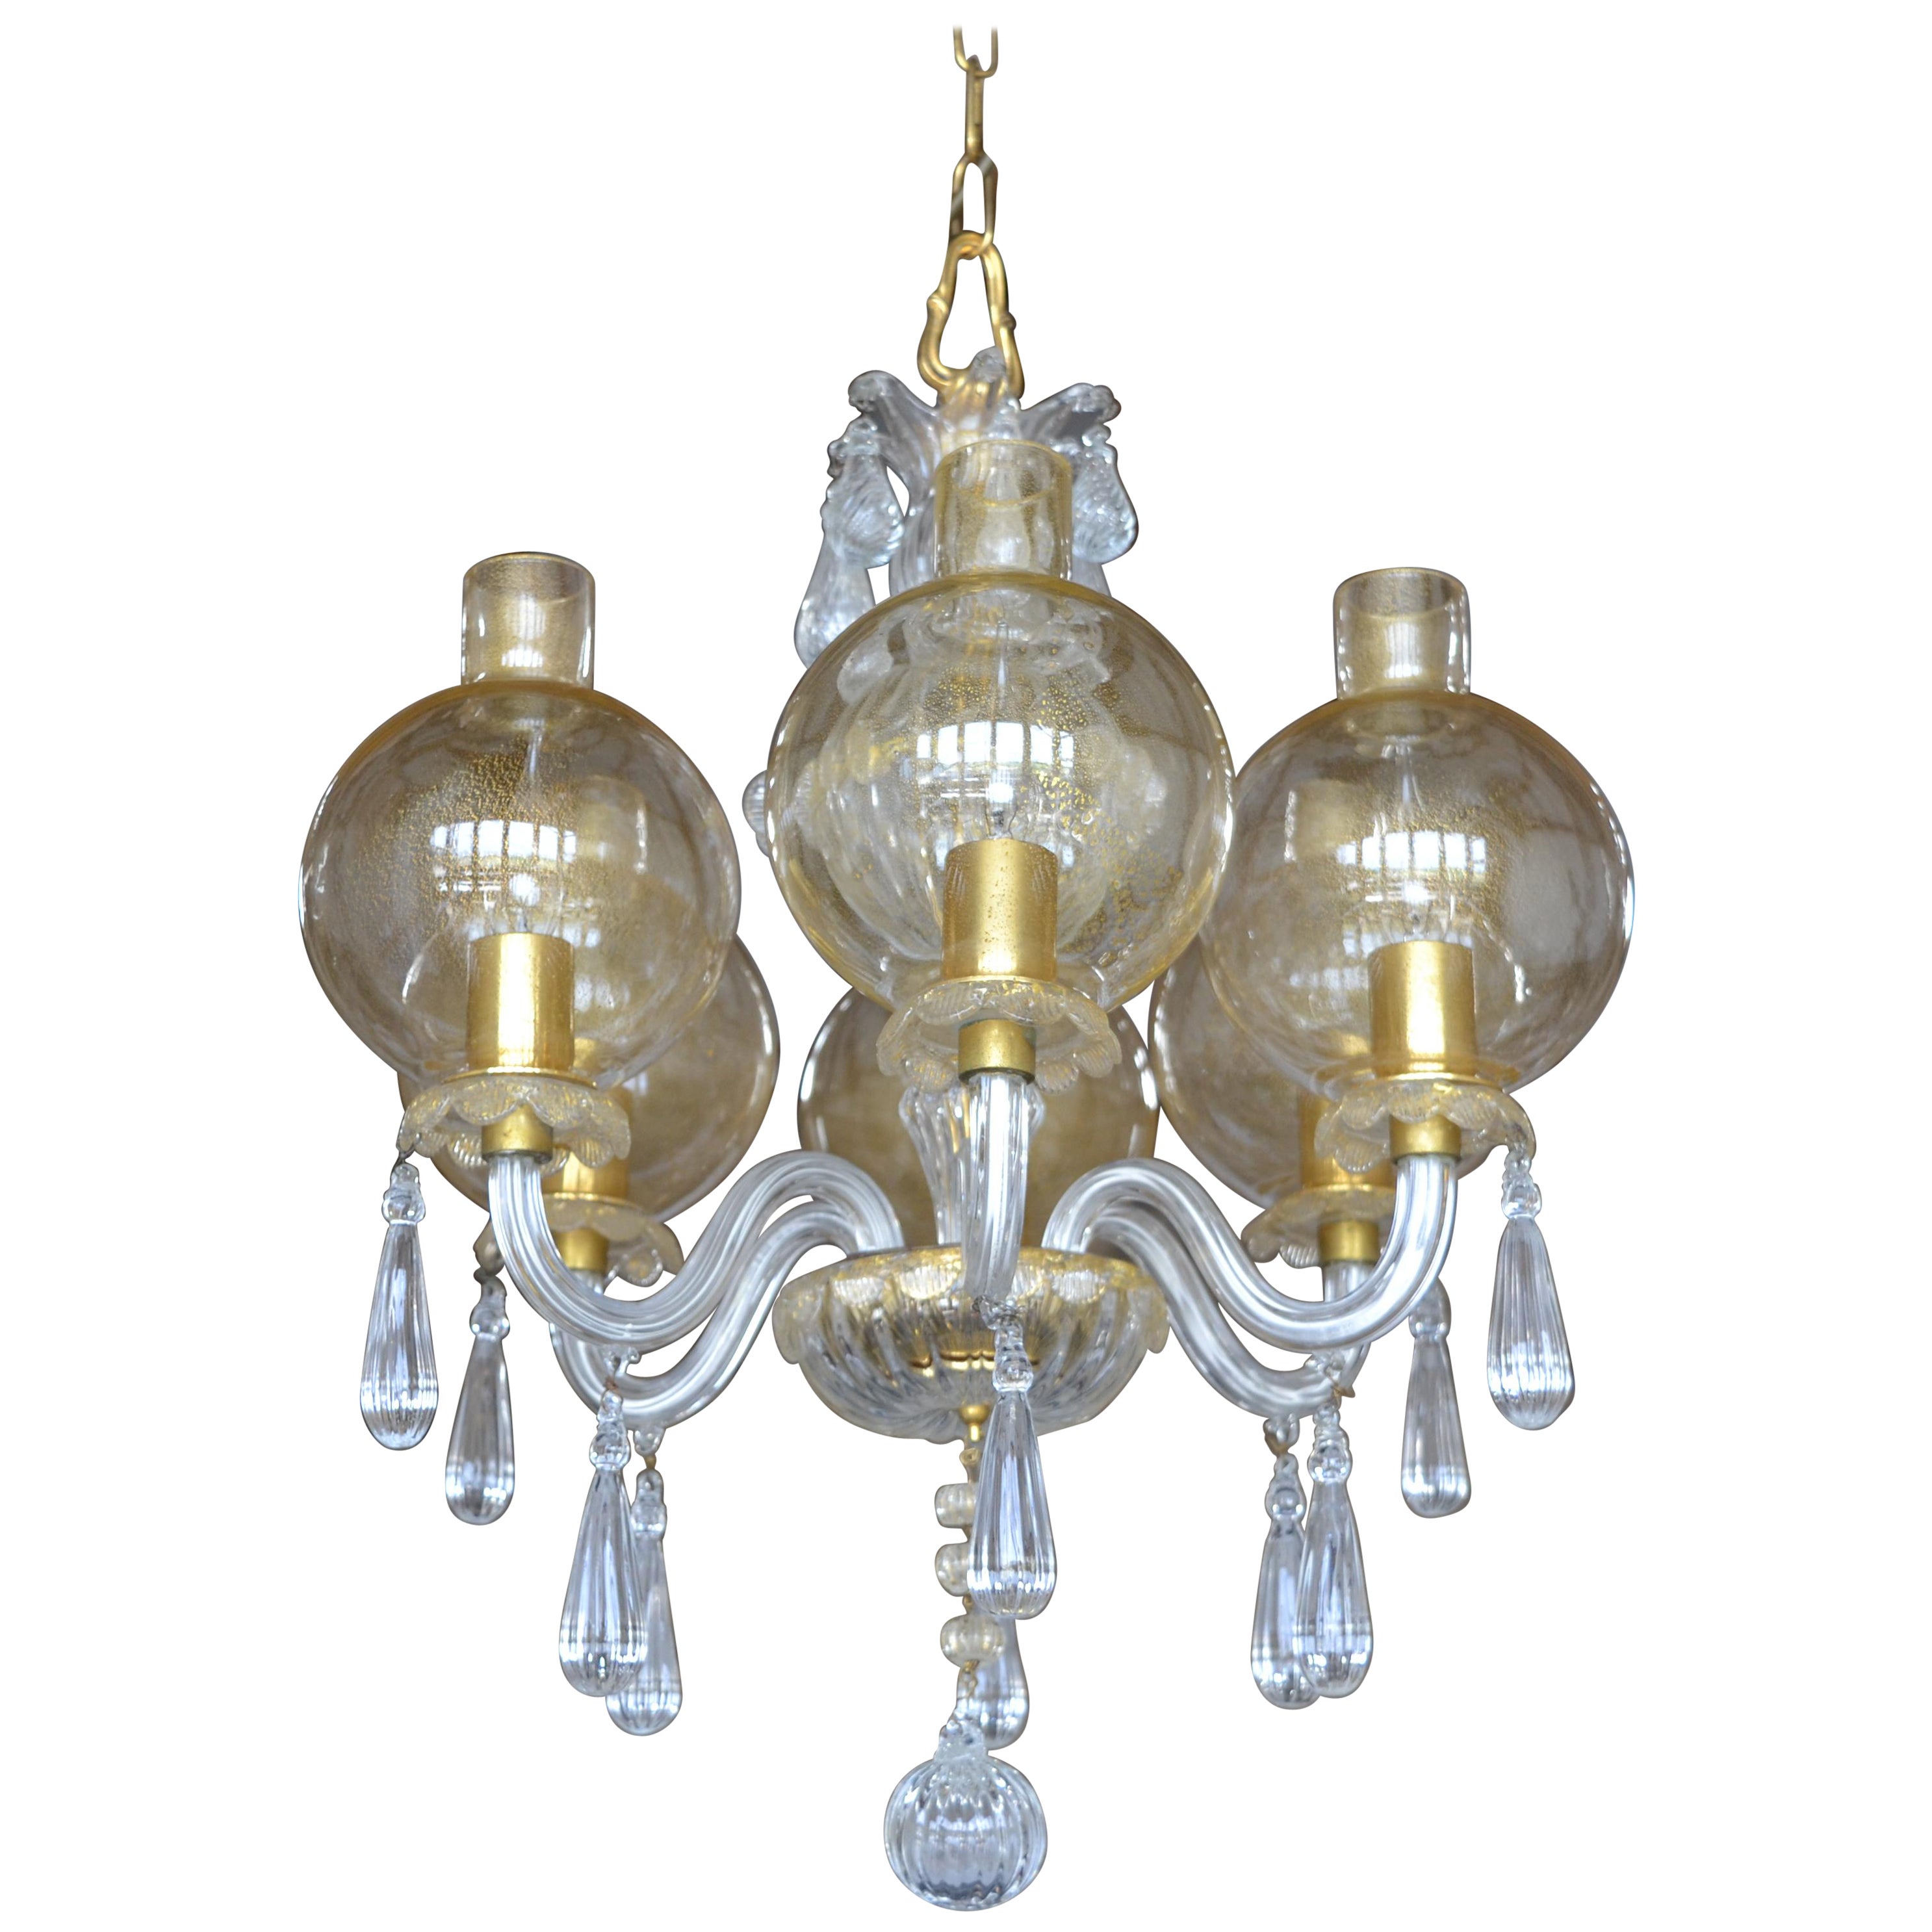 Mid-Century Venetian 6 light Chandelier with unusual Gold Storm Shades  For Sale